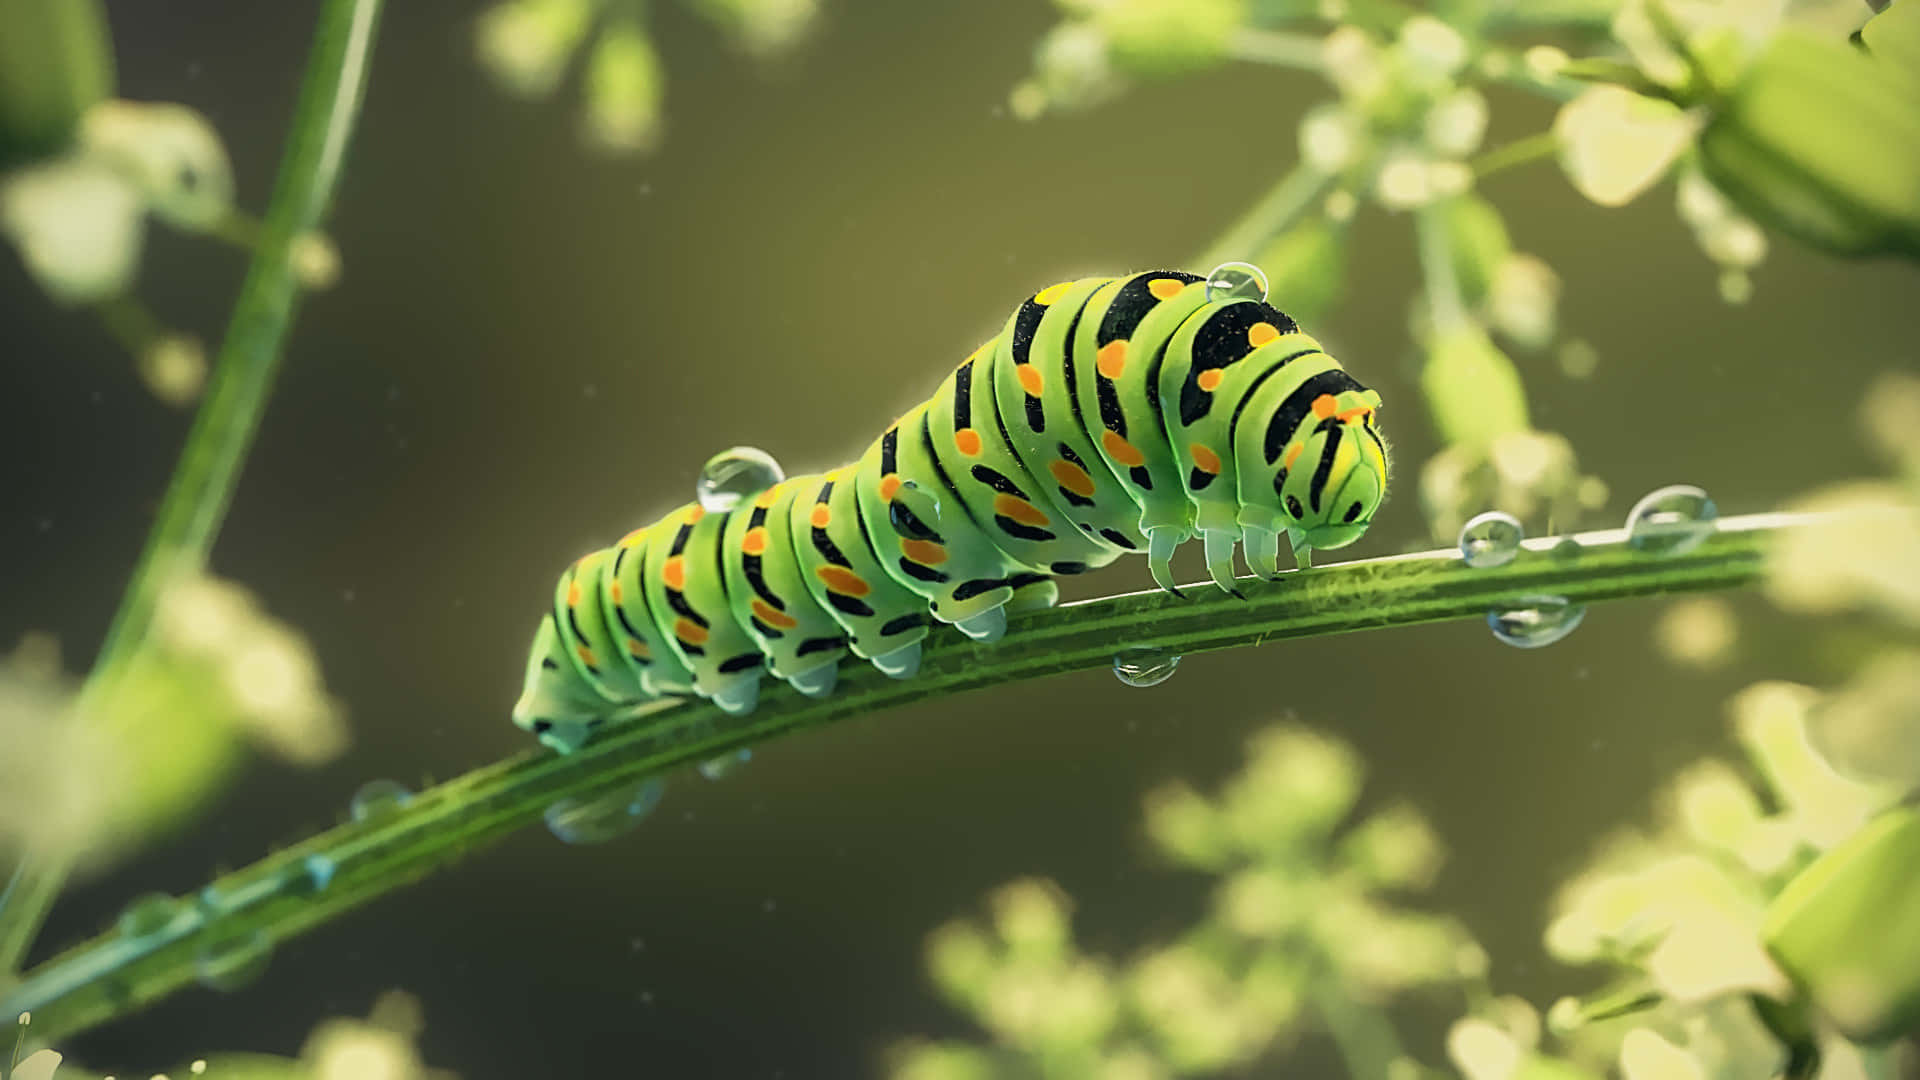 "The Miracle of Nature: Witness Caterpillar's Transformation" Wallpaper